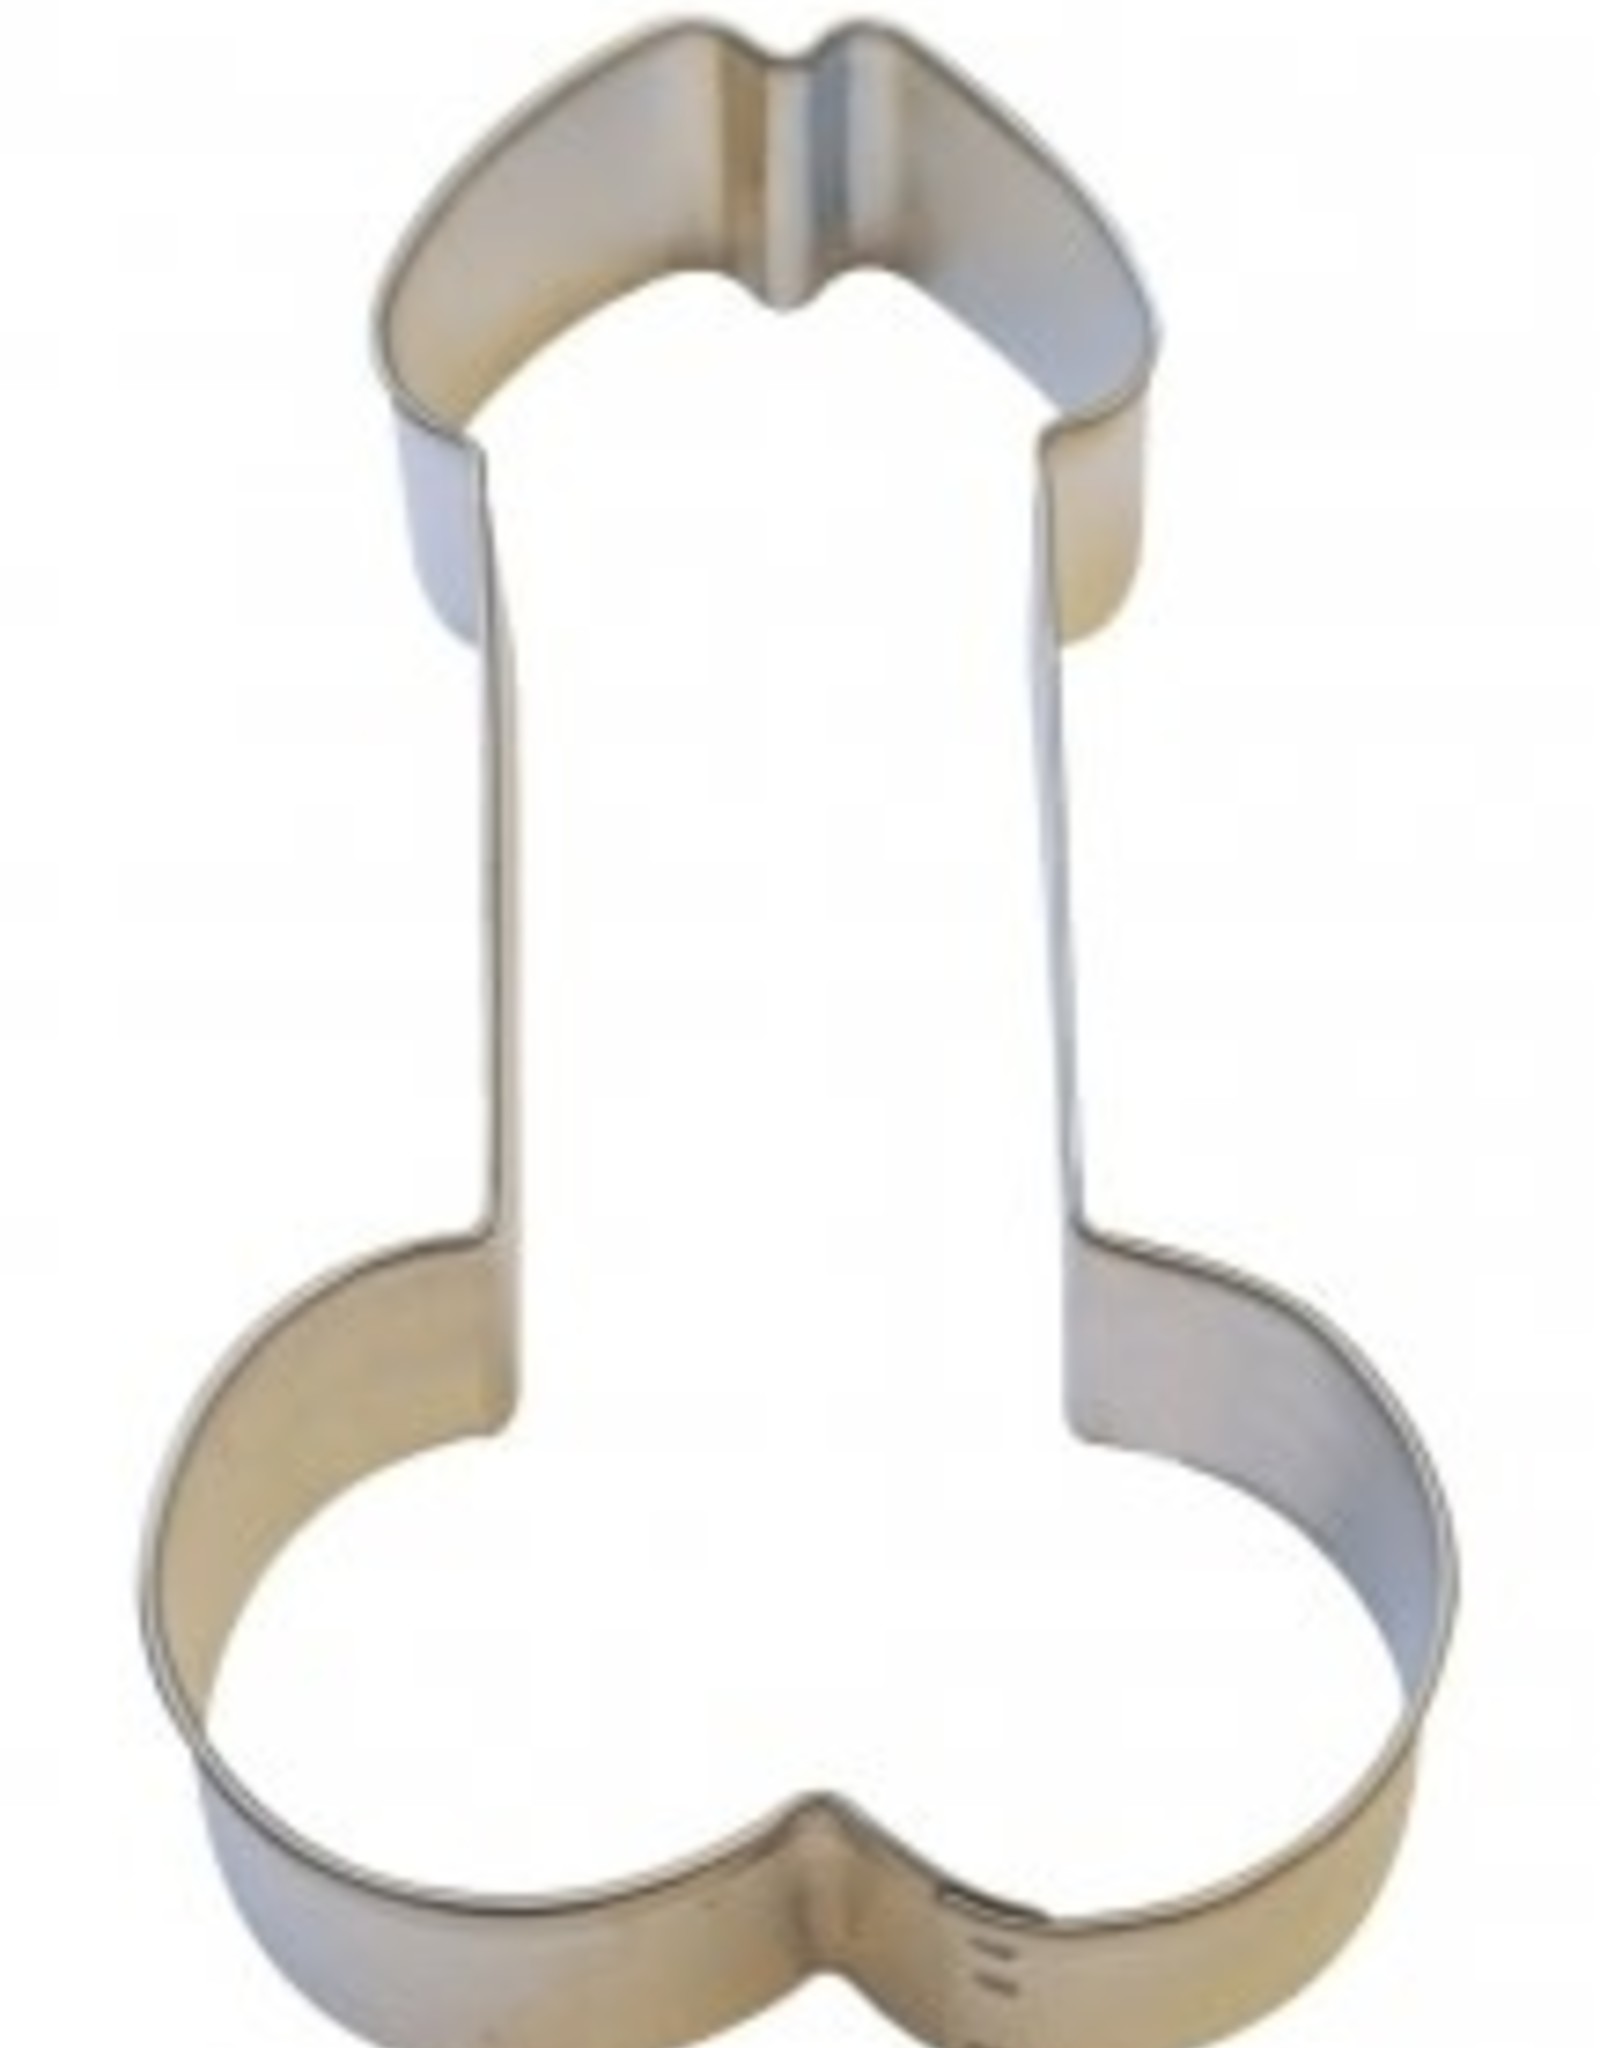 Male Anatomy Cookie Cutter (4.625")